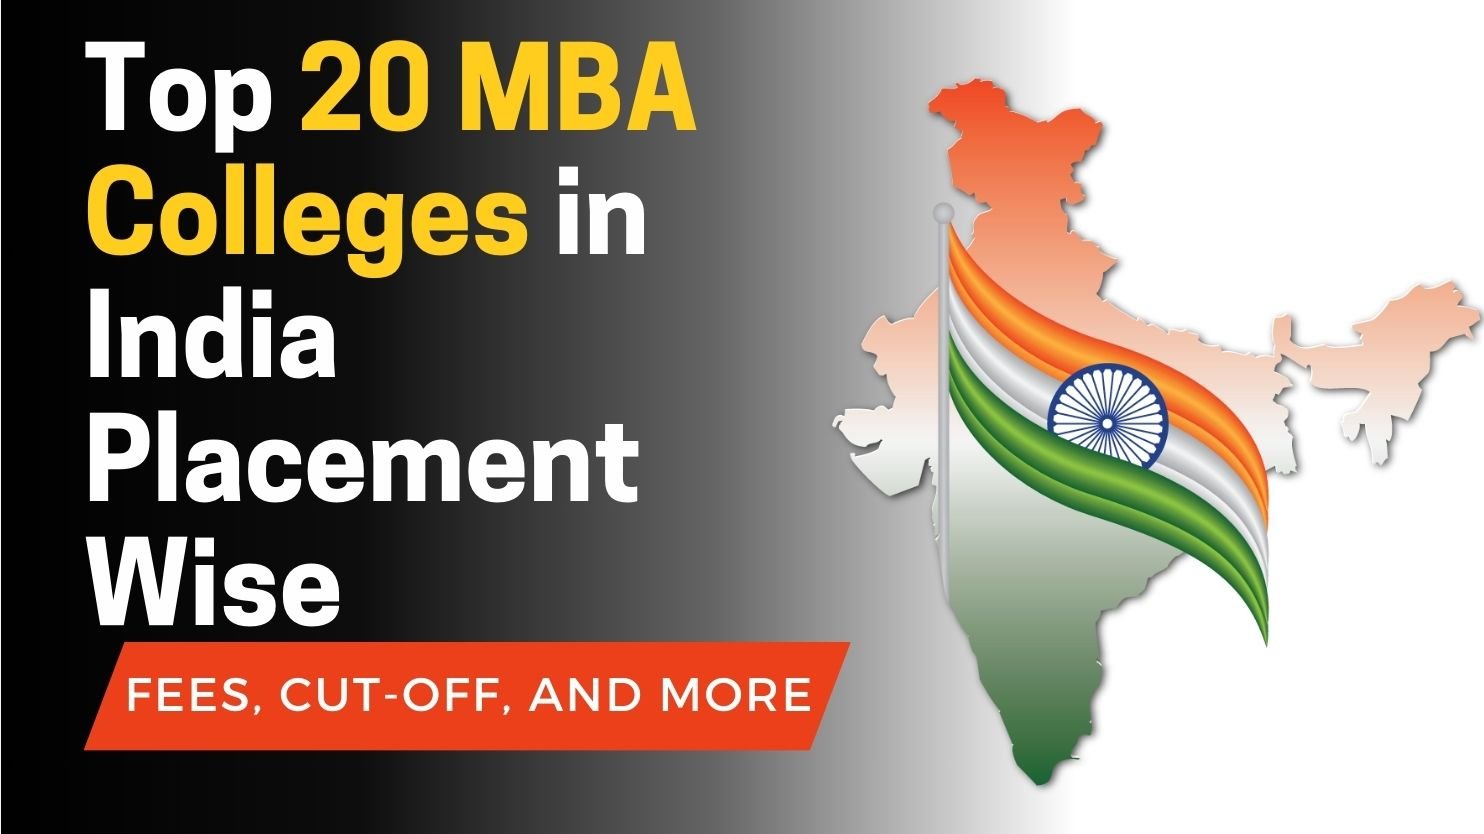 Top 20 MBA Colleges in India Placement Wise